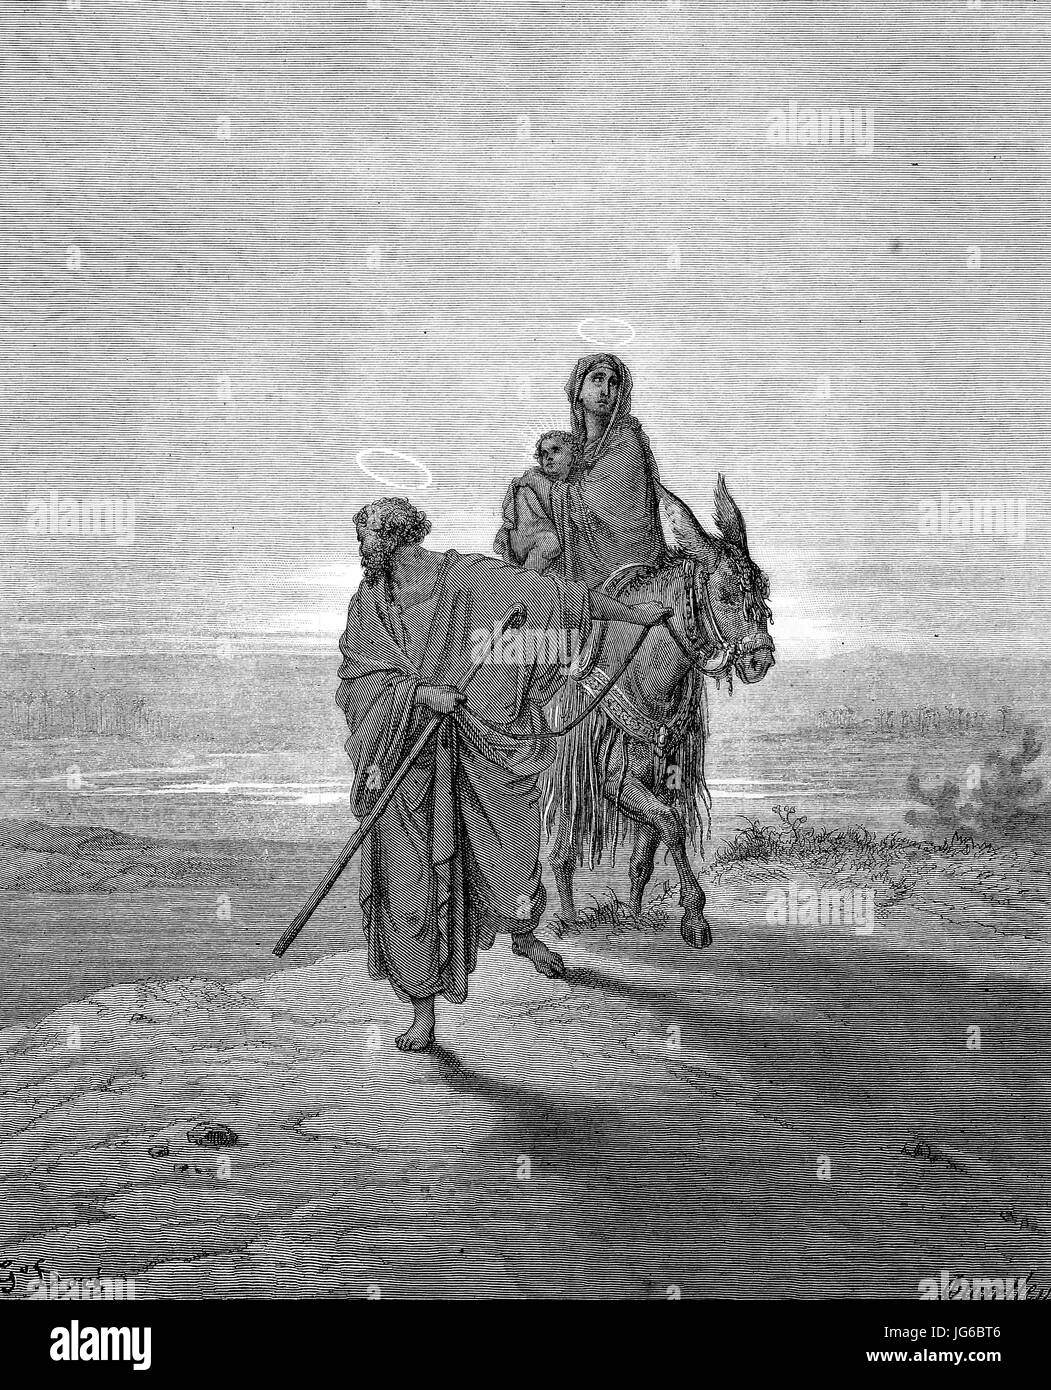 Digital improved:, The flight into Egypt is a biblical event described in the Gospel of Matthew. Soon after the visit by the Magi, who had learned that King Herod intended to kill the infants of that area, an angel appeared to Joseph in a dream to tell him to flee to Egypt with Mary and infant son Jesus, illustration from the 19th century Stock Photo